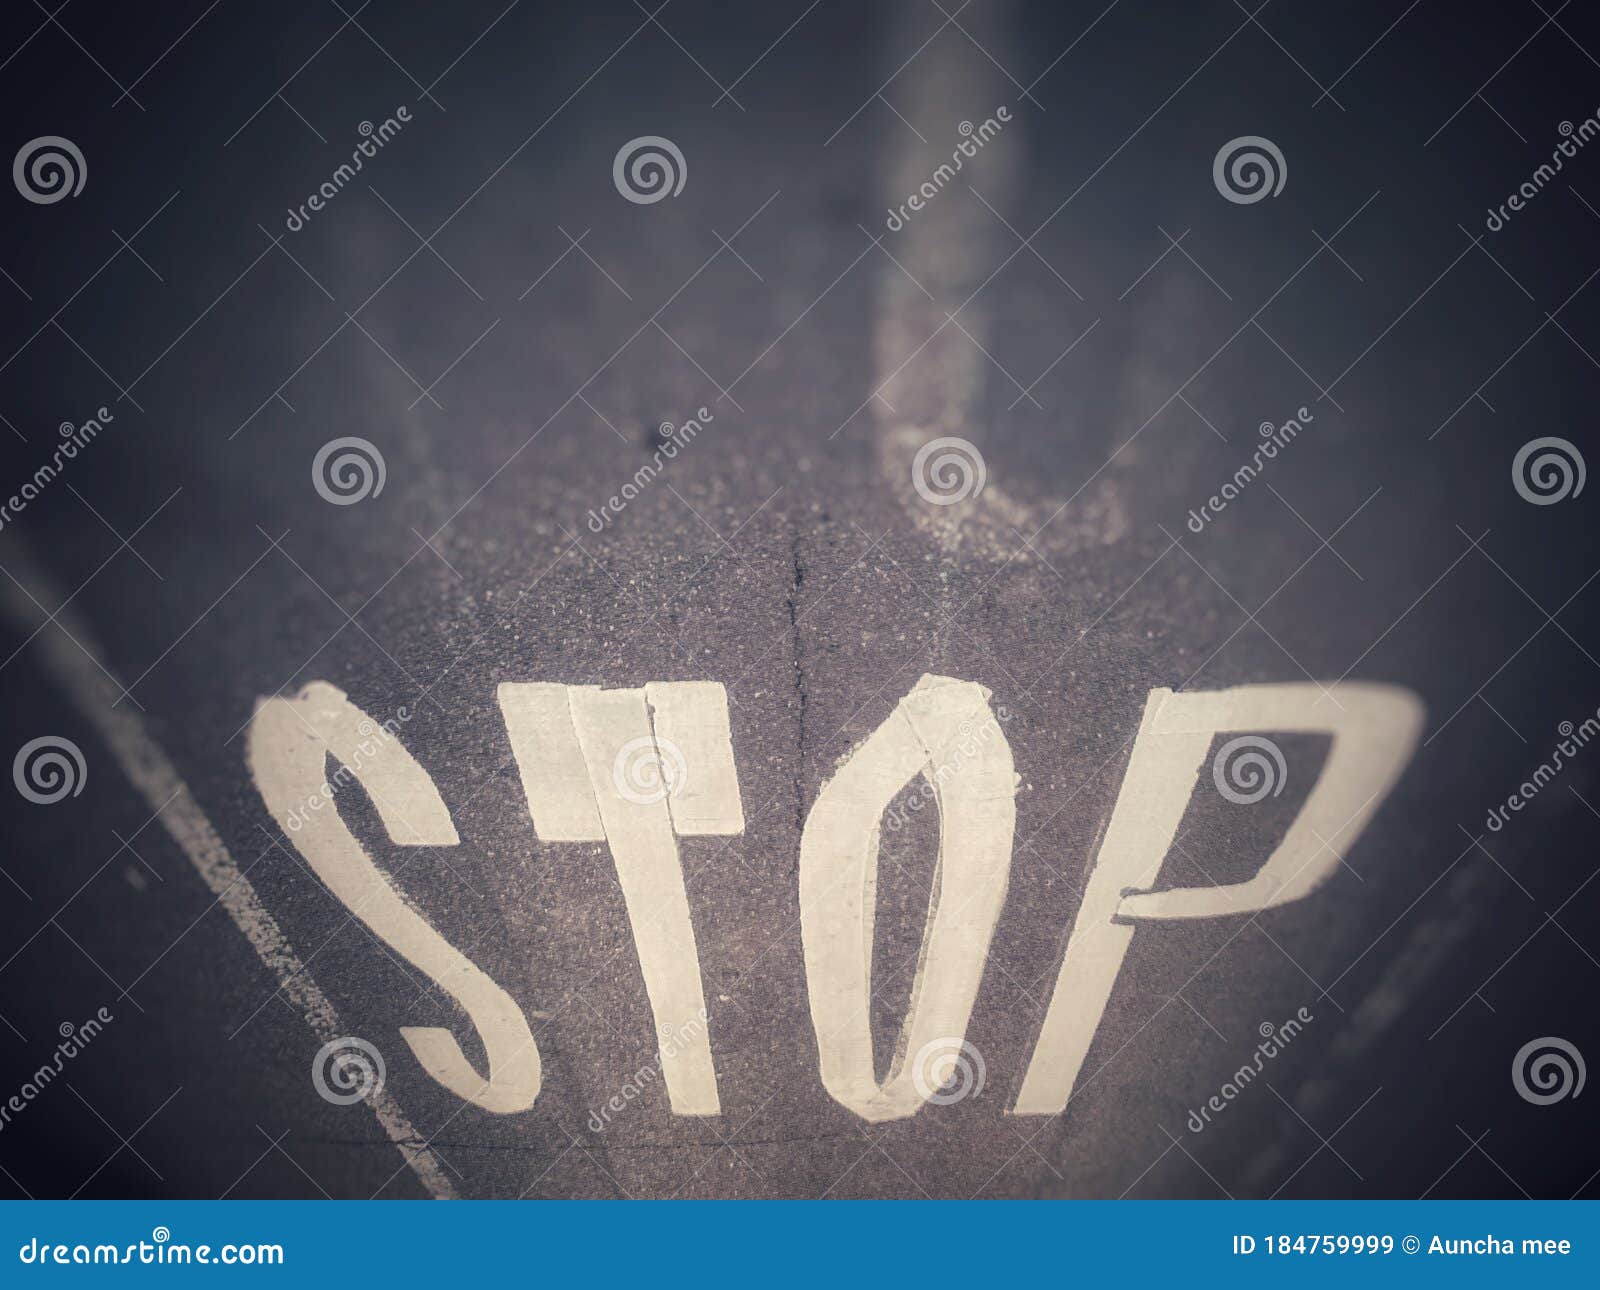 stop painted sign on the road at newyork city - america. image